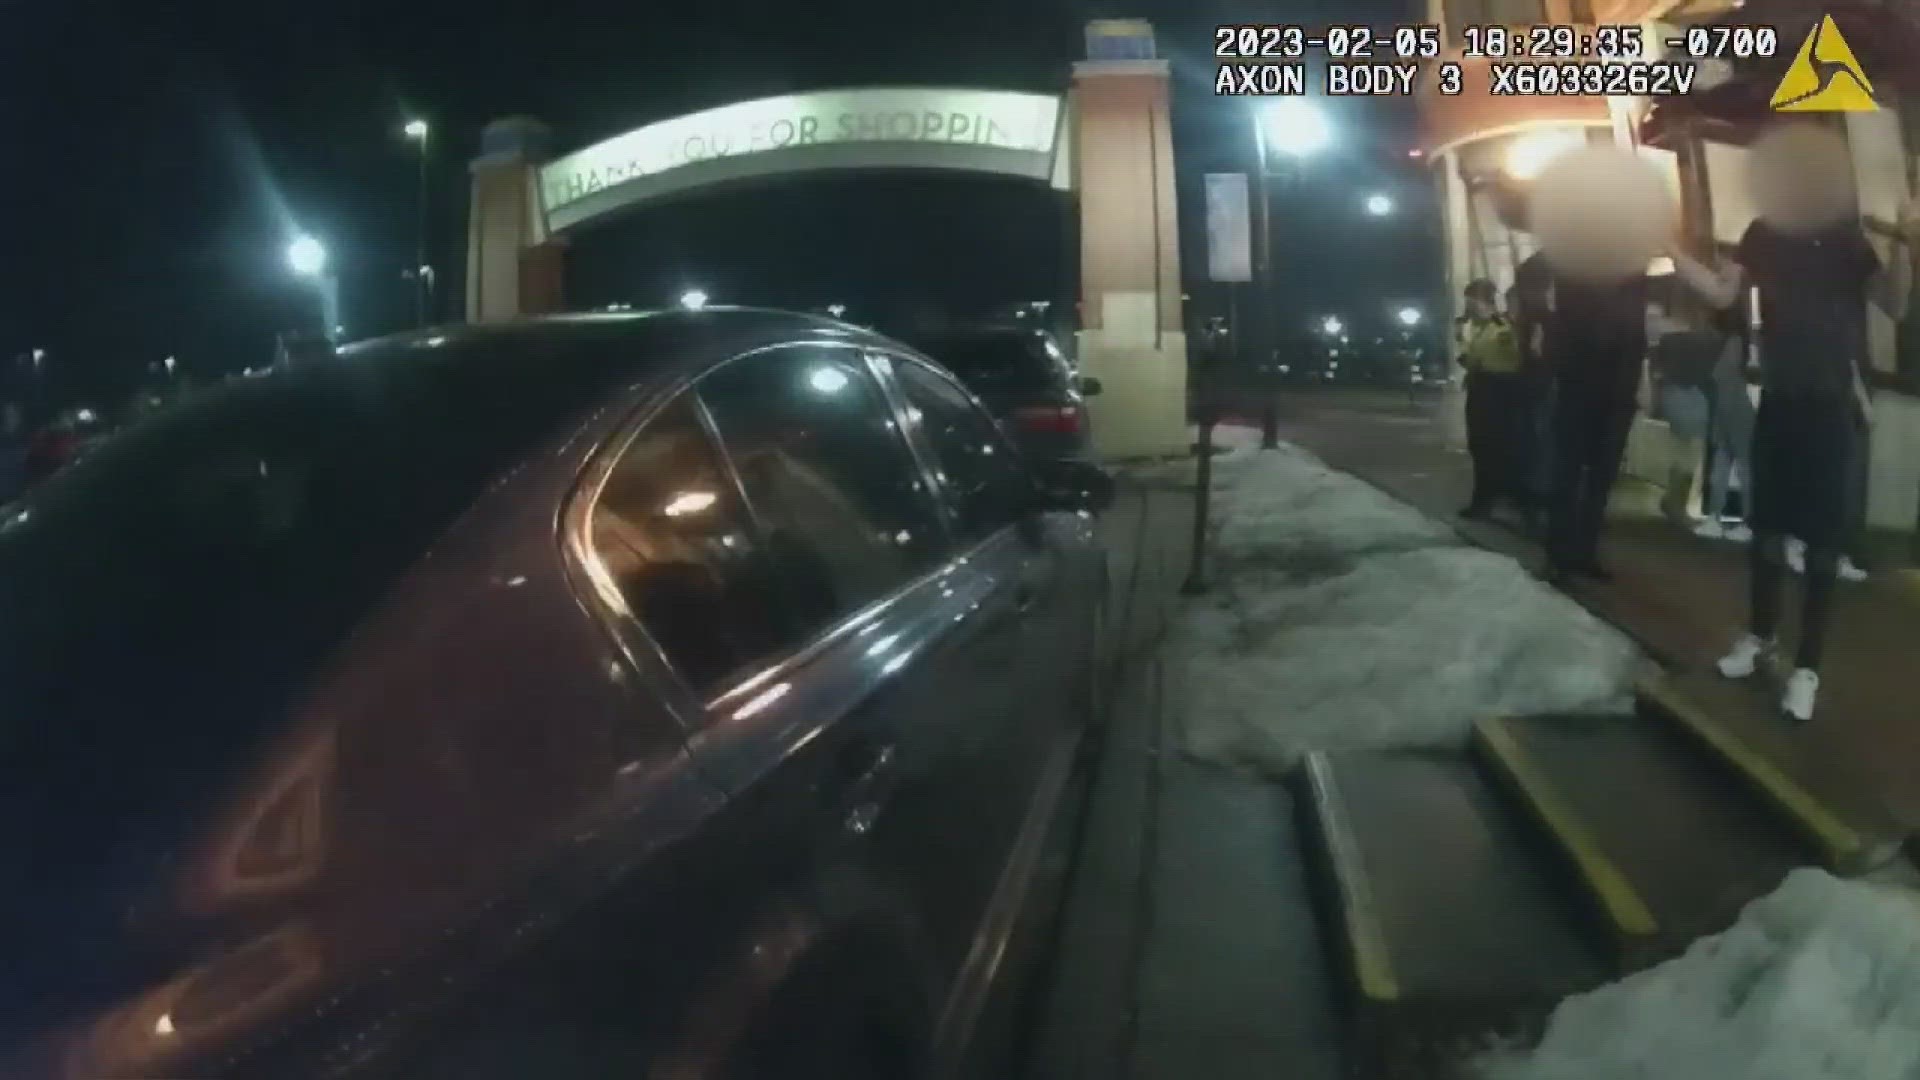 Before Elias Armstrong was fatally shot while in a stolen car, a frustrated car owner is heard on video repeatedly telling police he will confront thieves himself.